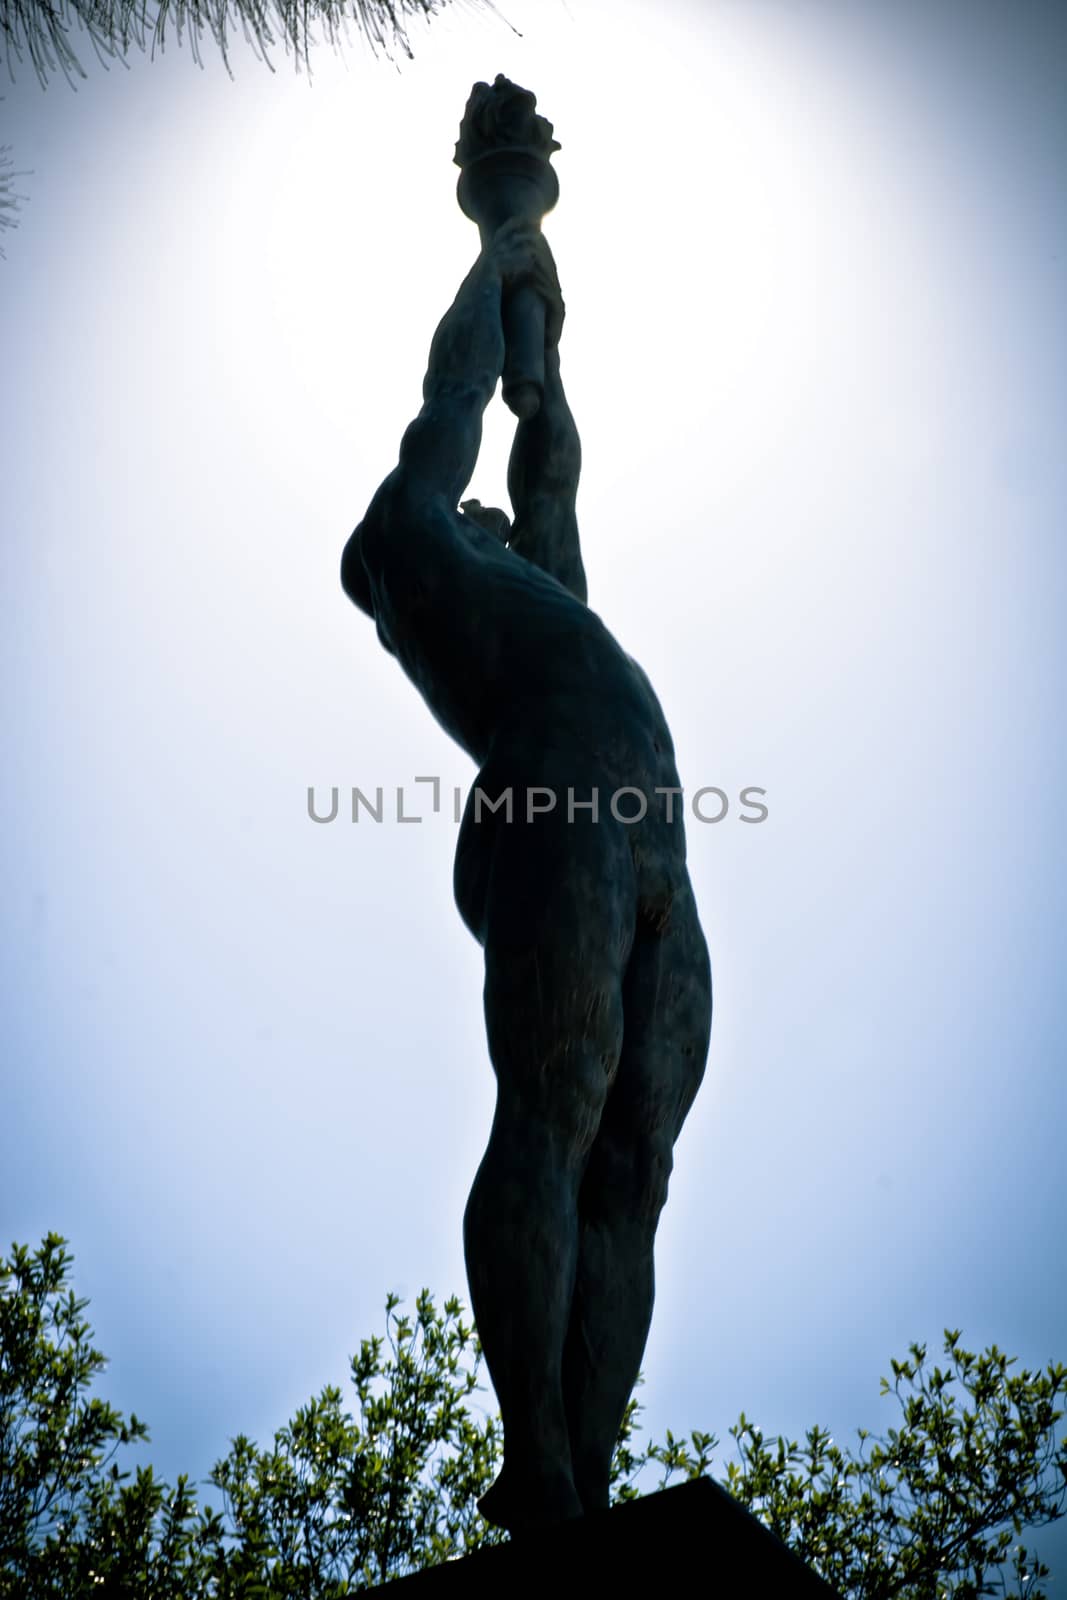 Statue of an Olympic athlete holding a torch silhoutted against a blue sky in Olympic Park, Barcelona